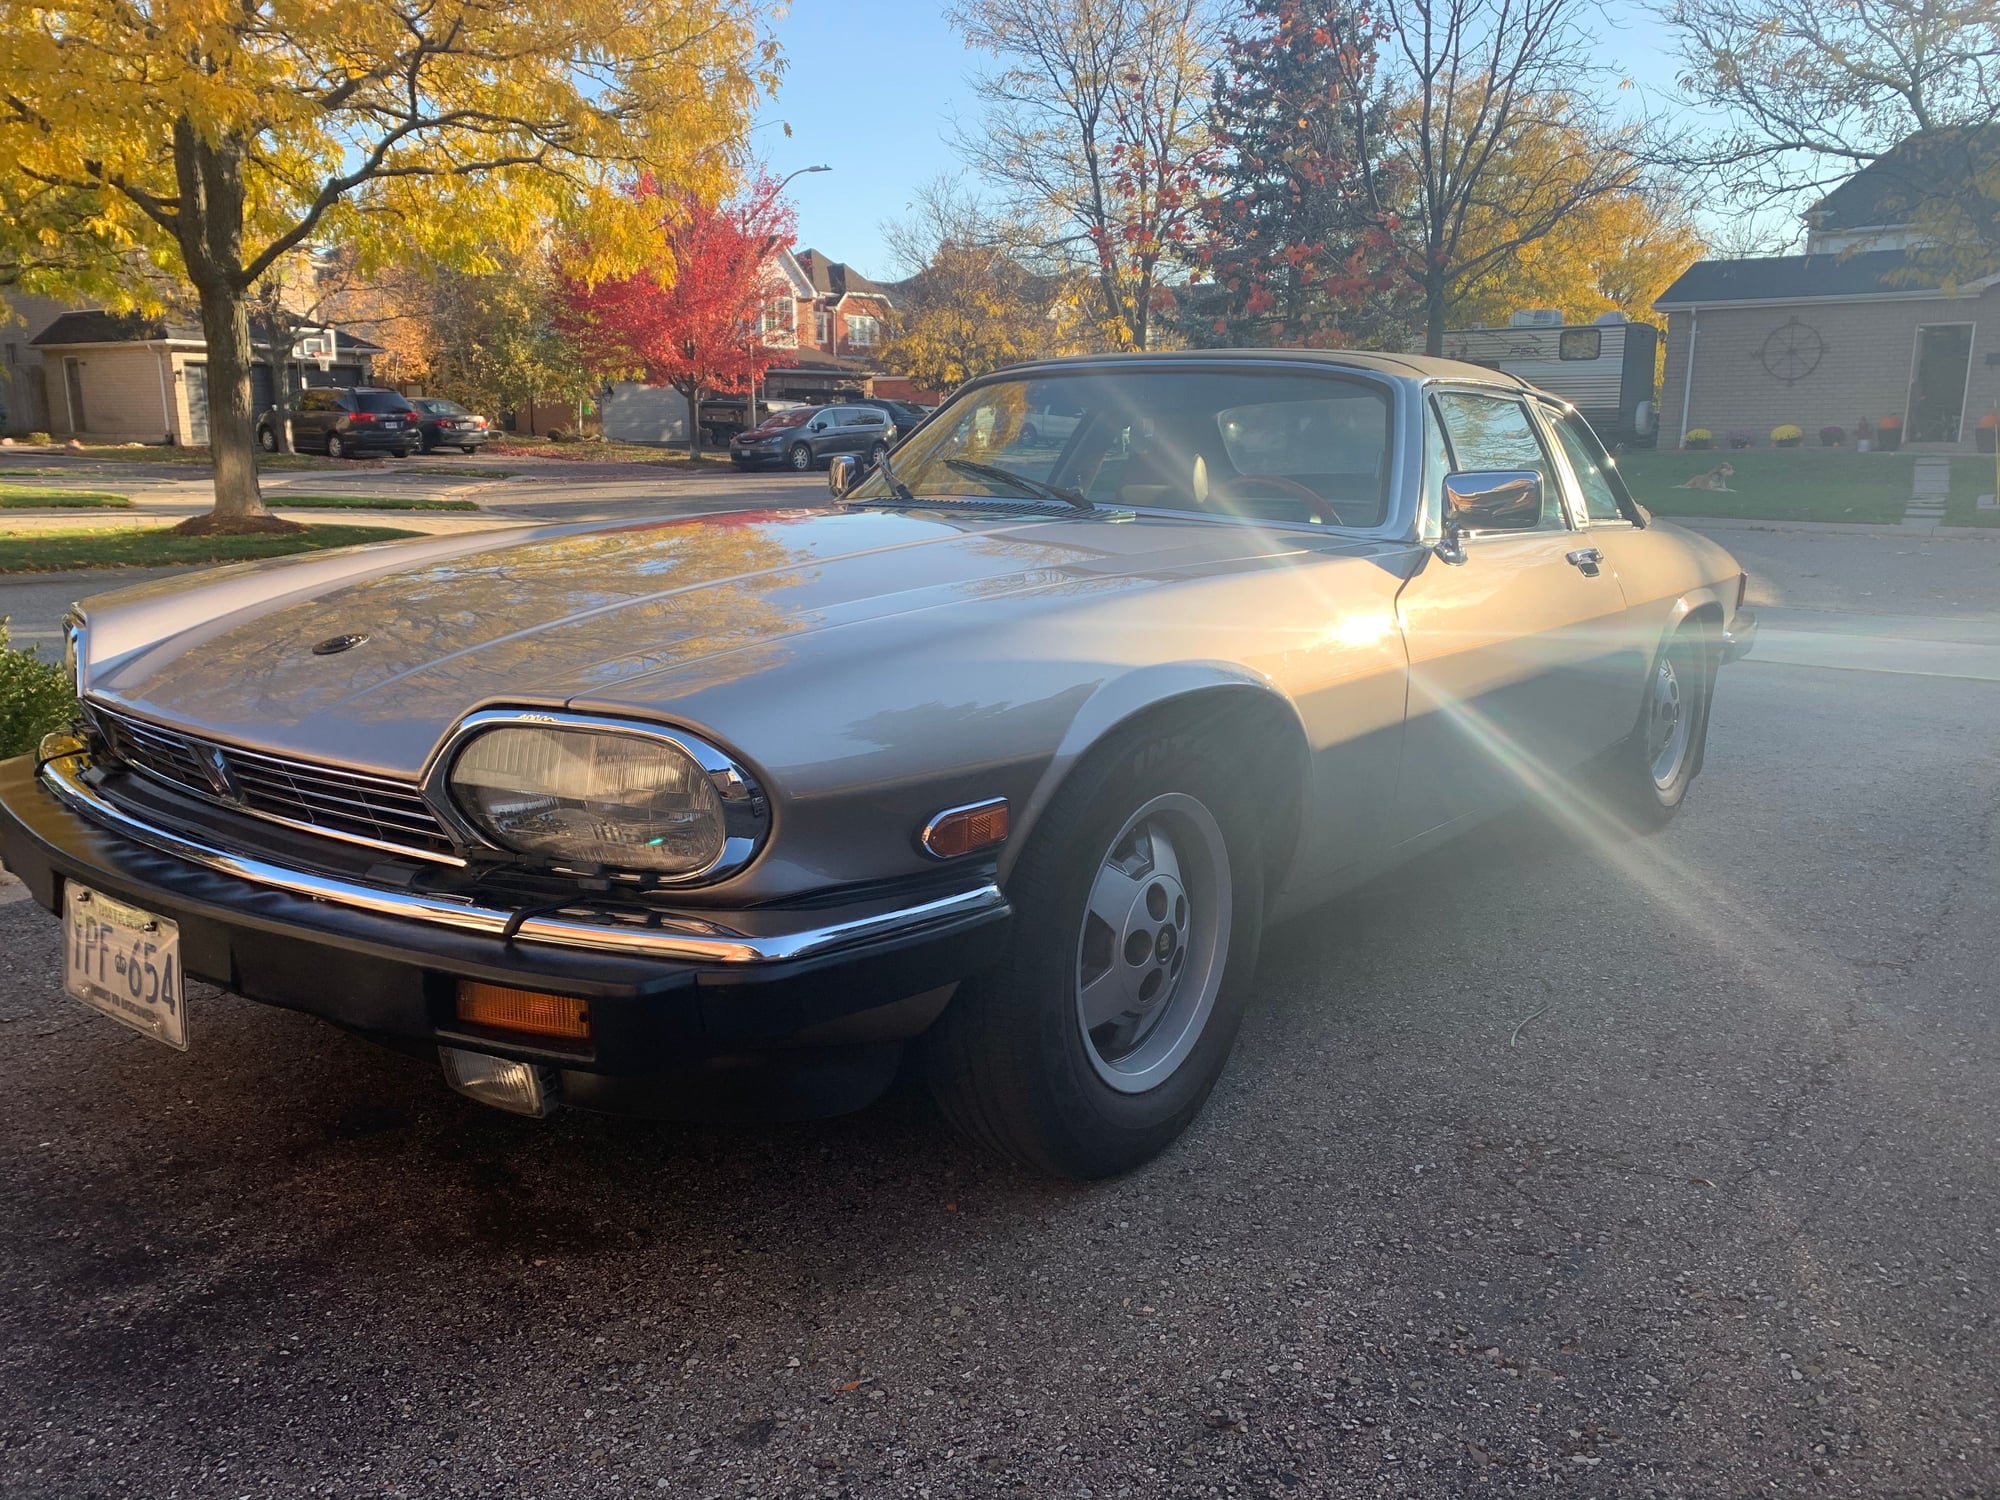 1987 Jaguar XJS - 1987 XJSC great condition with low KM's - Used - VIN SAJNL3047HC139409 - 123,000 Miles - 12 cyl - Georgetown, ON L7G5W6, Canada